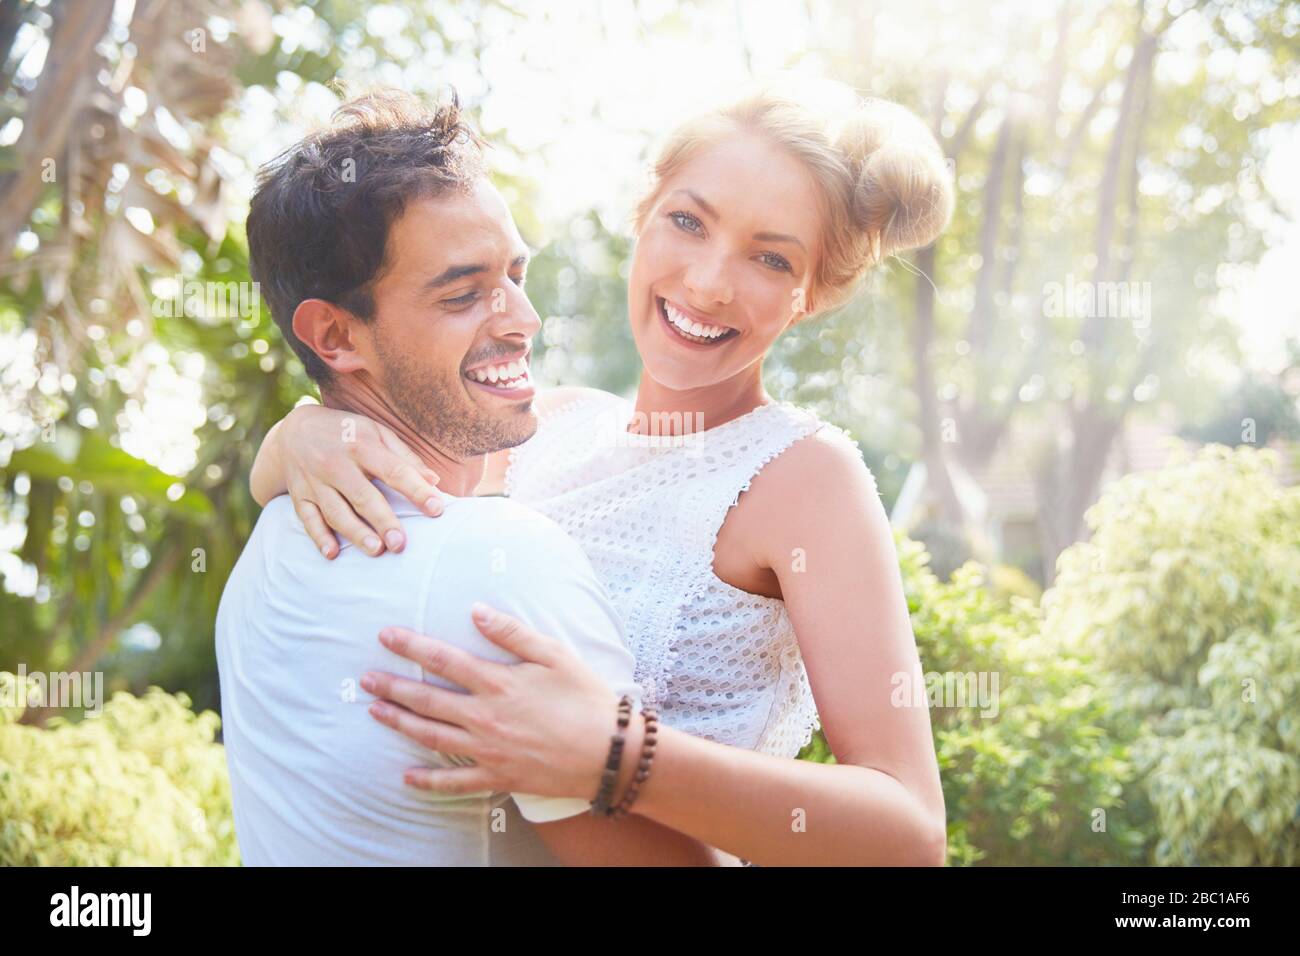 Portrait smiling young couple hugging in park Stock Photo